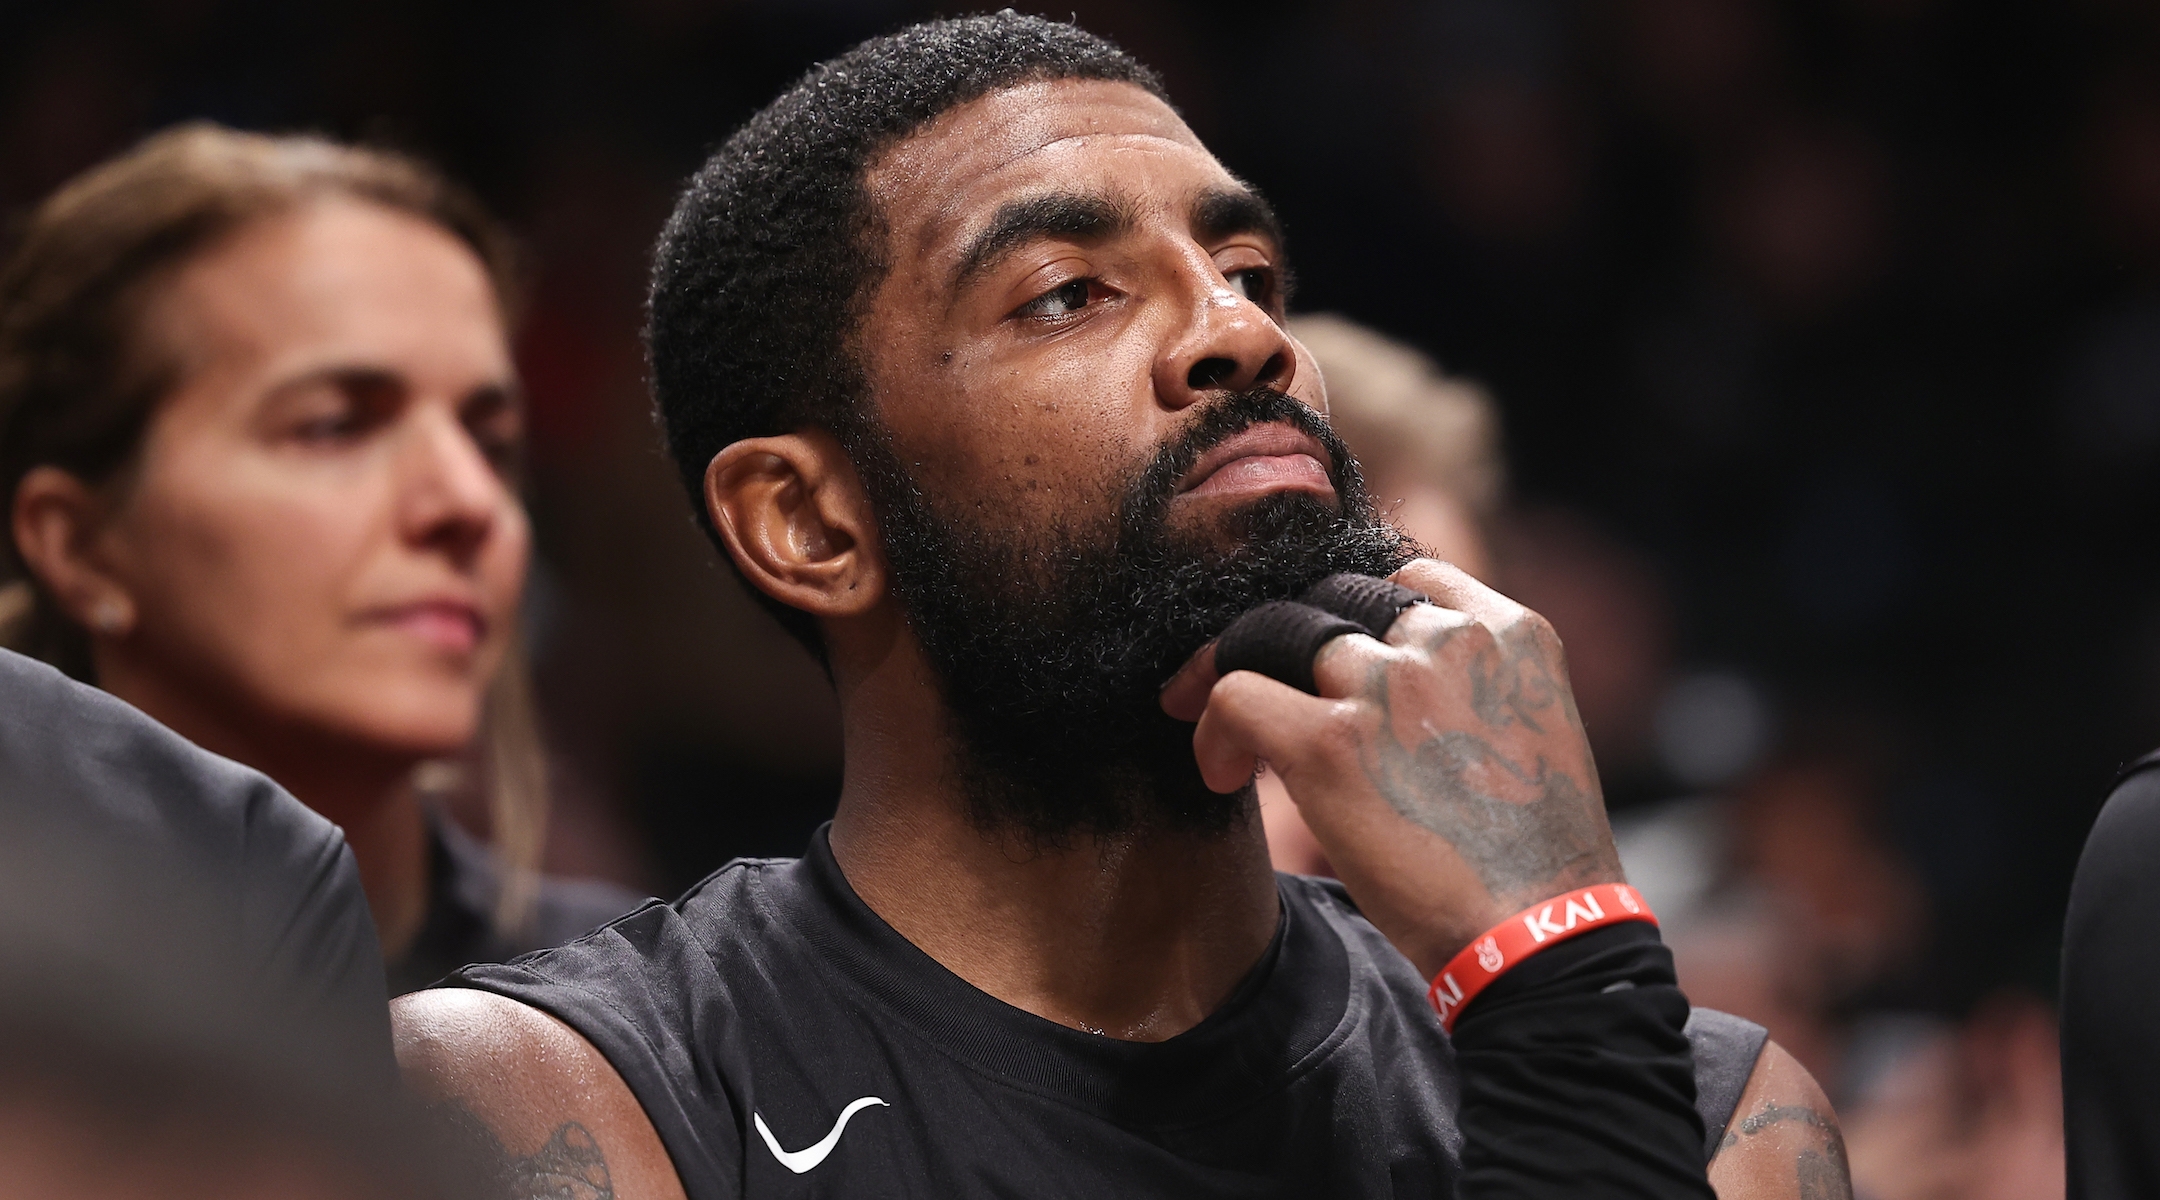 Kyrie Irving looks on from the bench during a game against the Indiana Pacers at the Barclays Center in Brooklyn, Oct. 31, 2022 (Dustin Satloff/Getty Images)